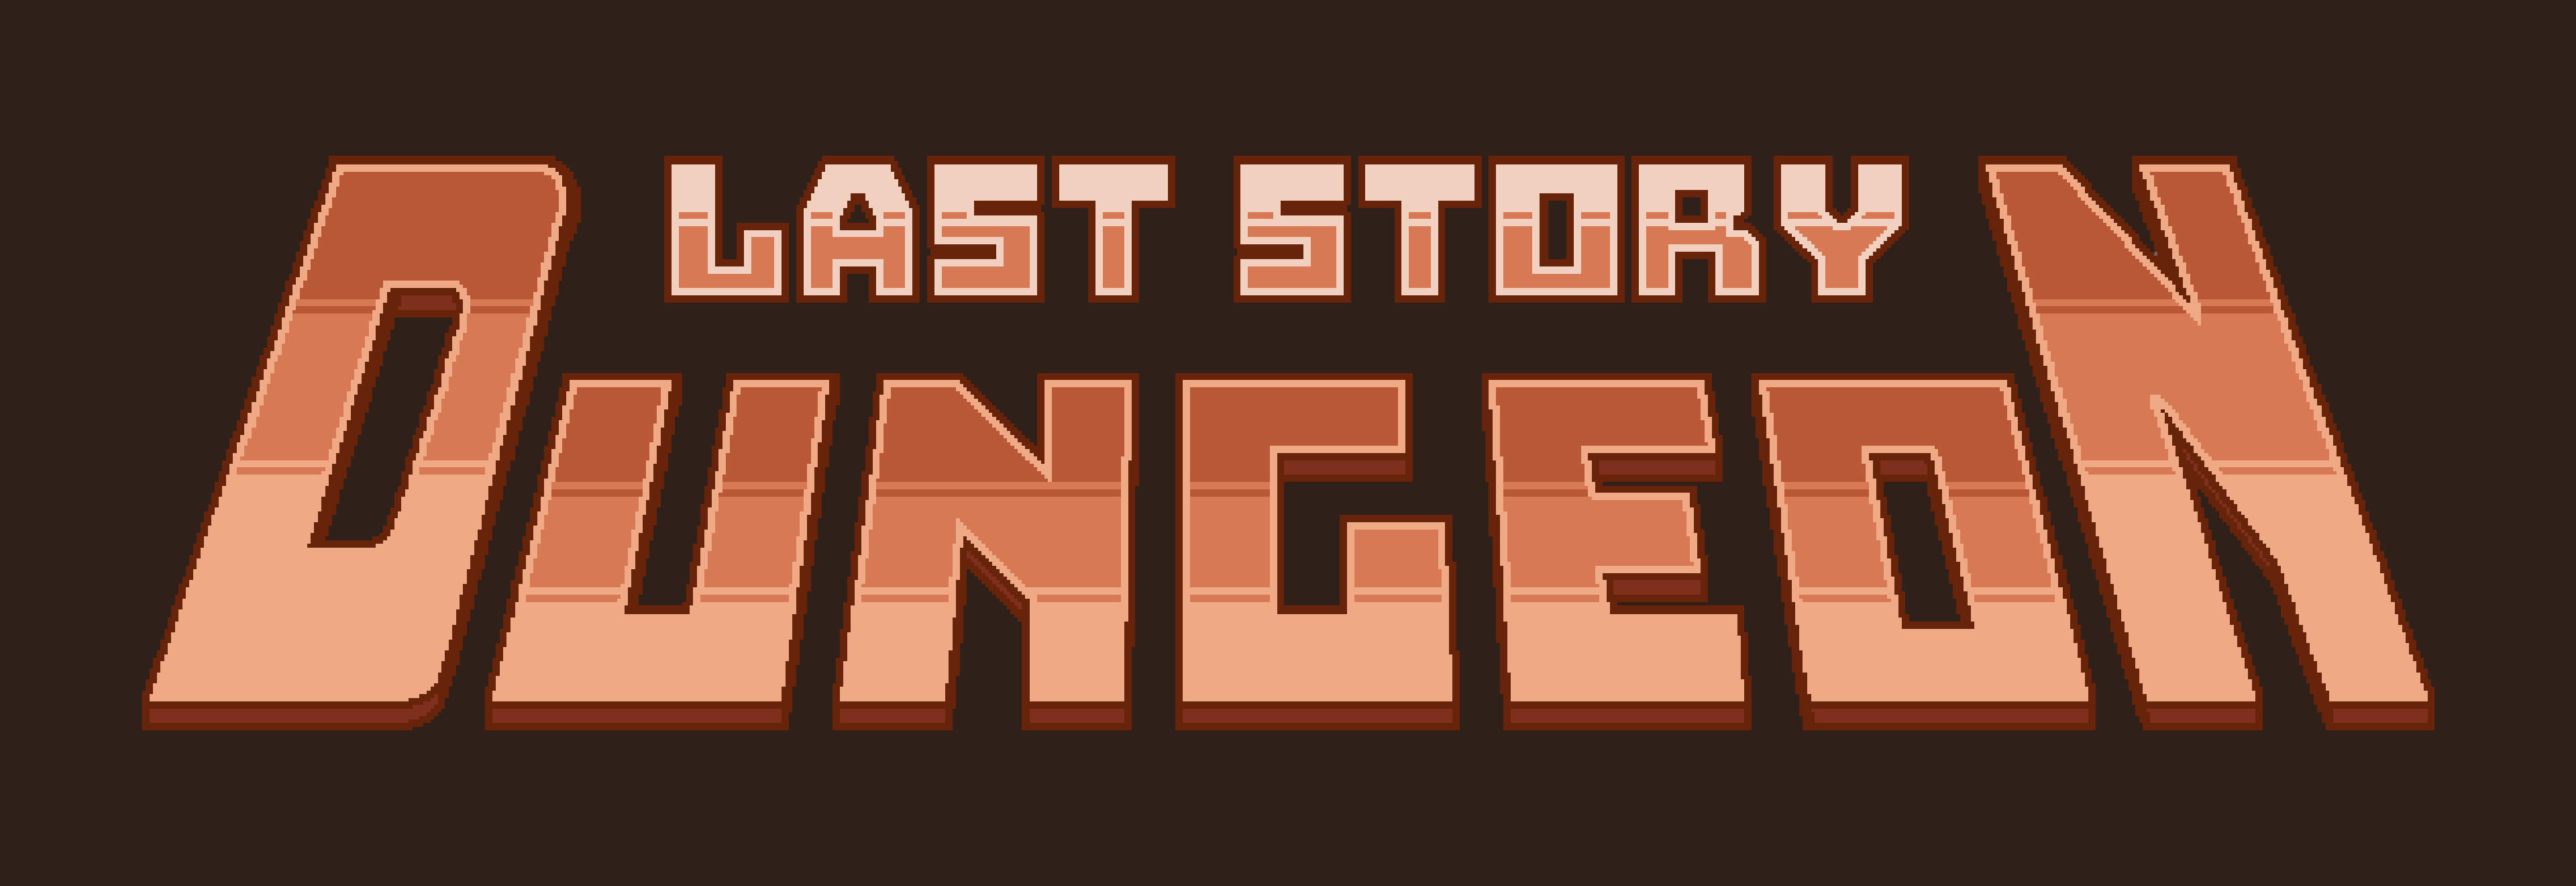 Last Story - Dungeon